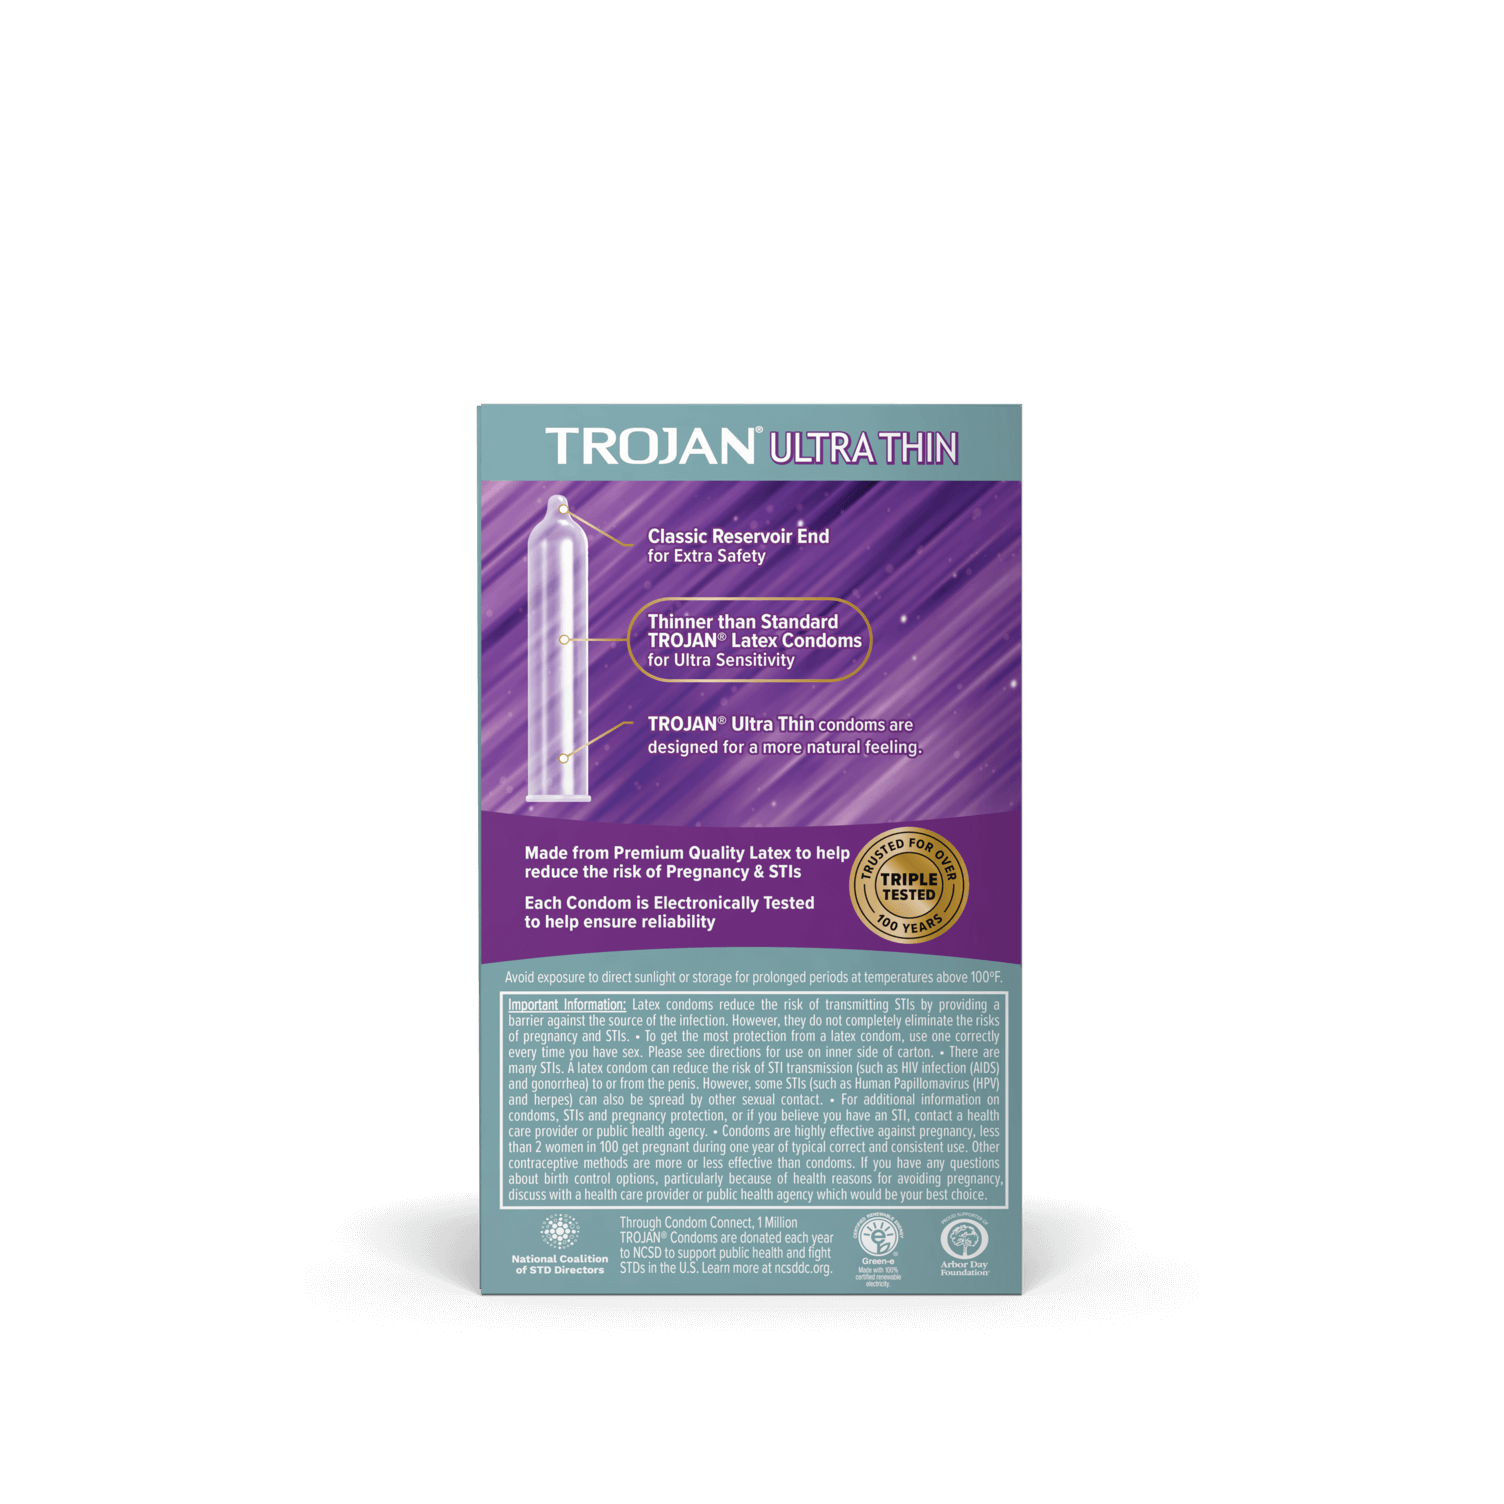 Trojan Ultra Thin Lubricated Condom back of package.